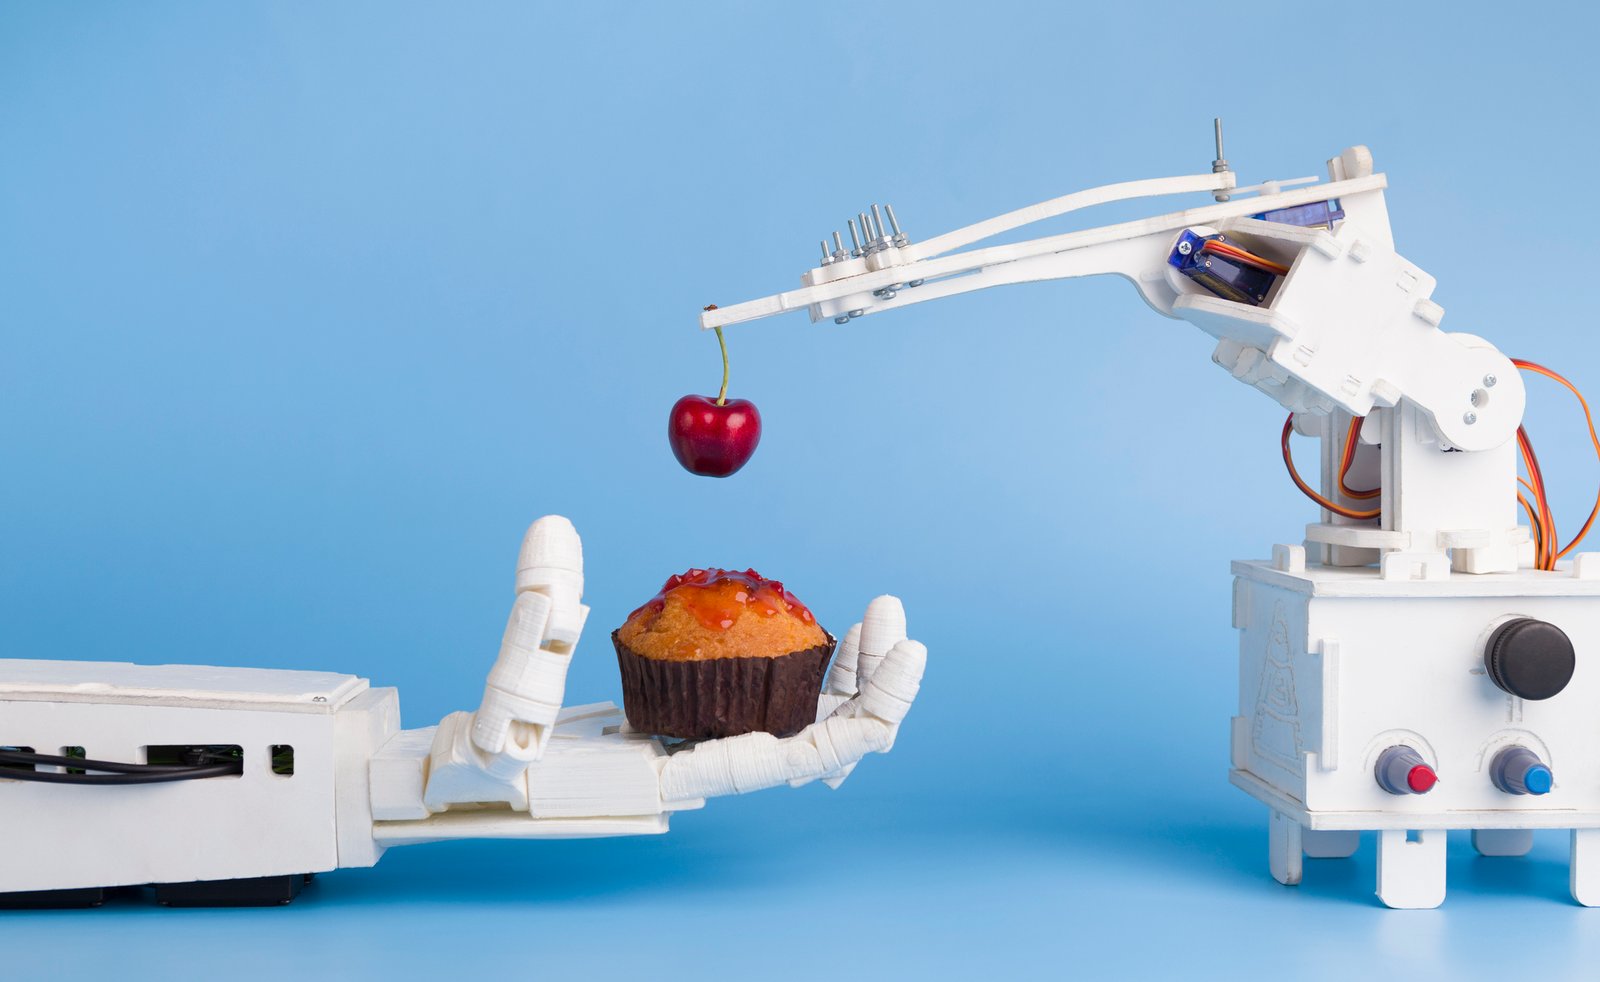 Robots ‘ready to lengthen attain’ in meals industry